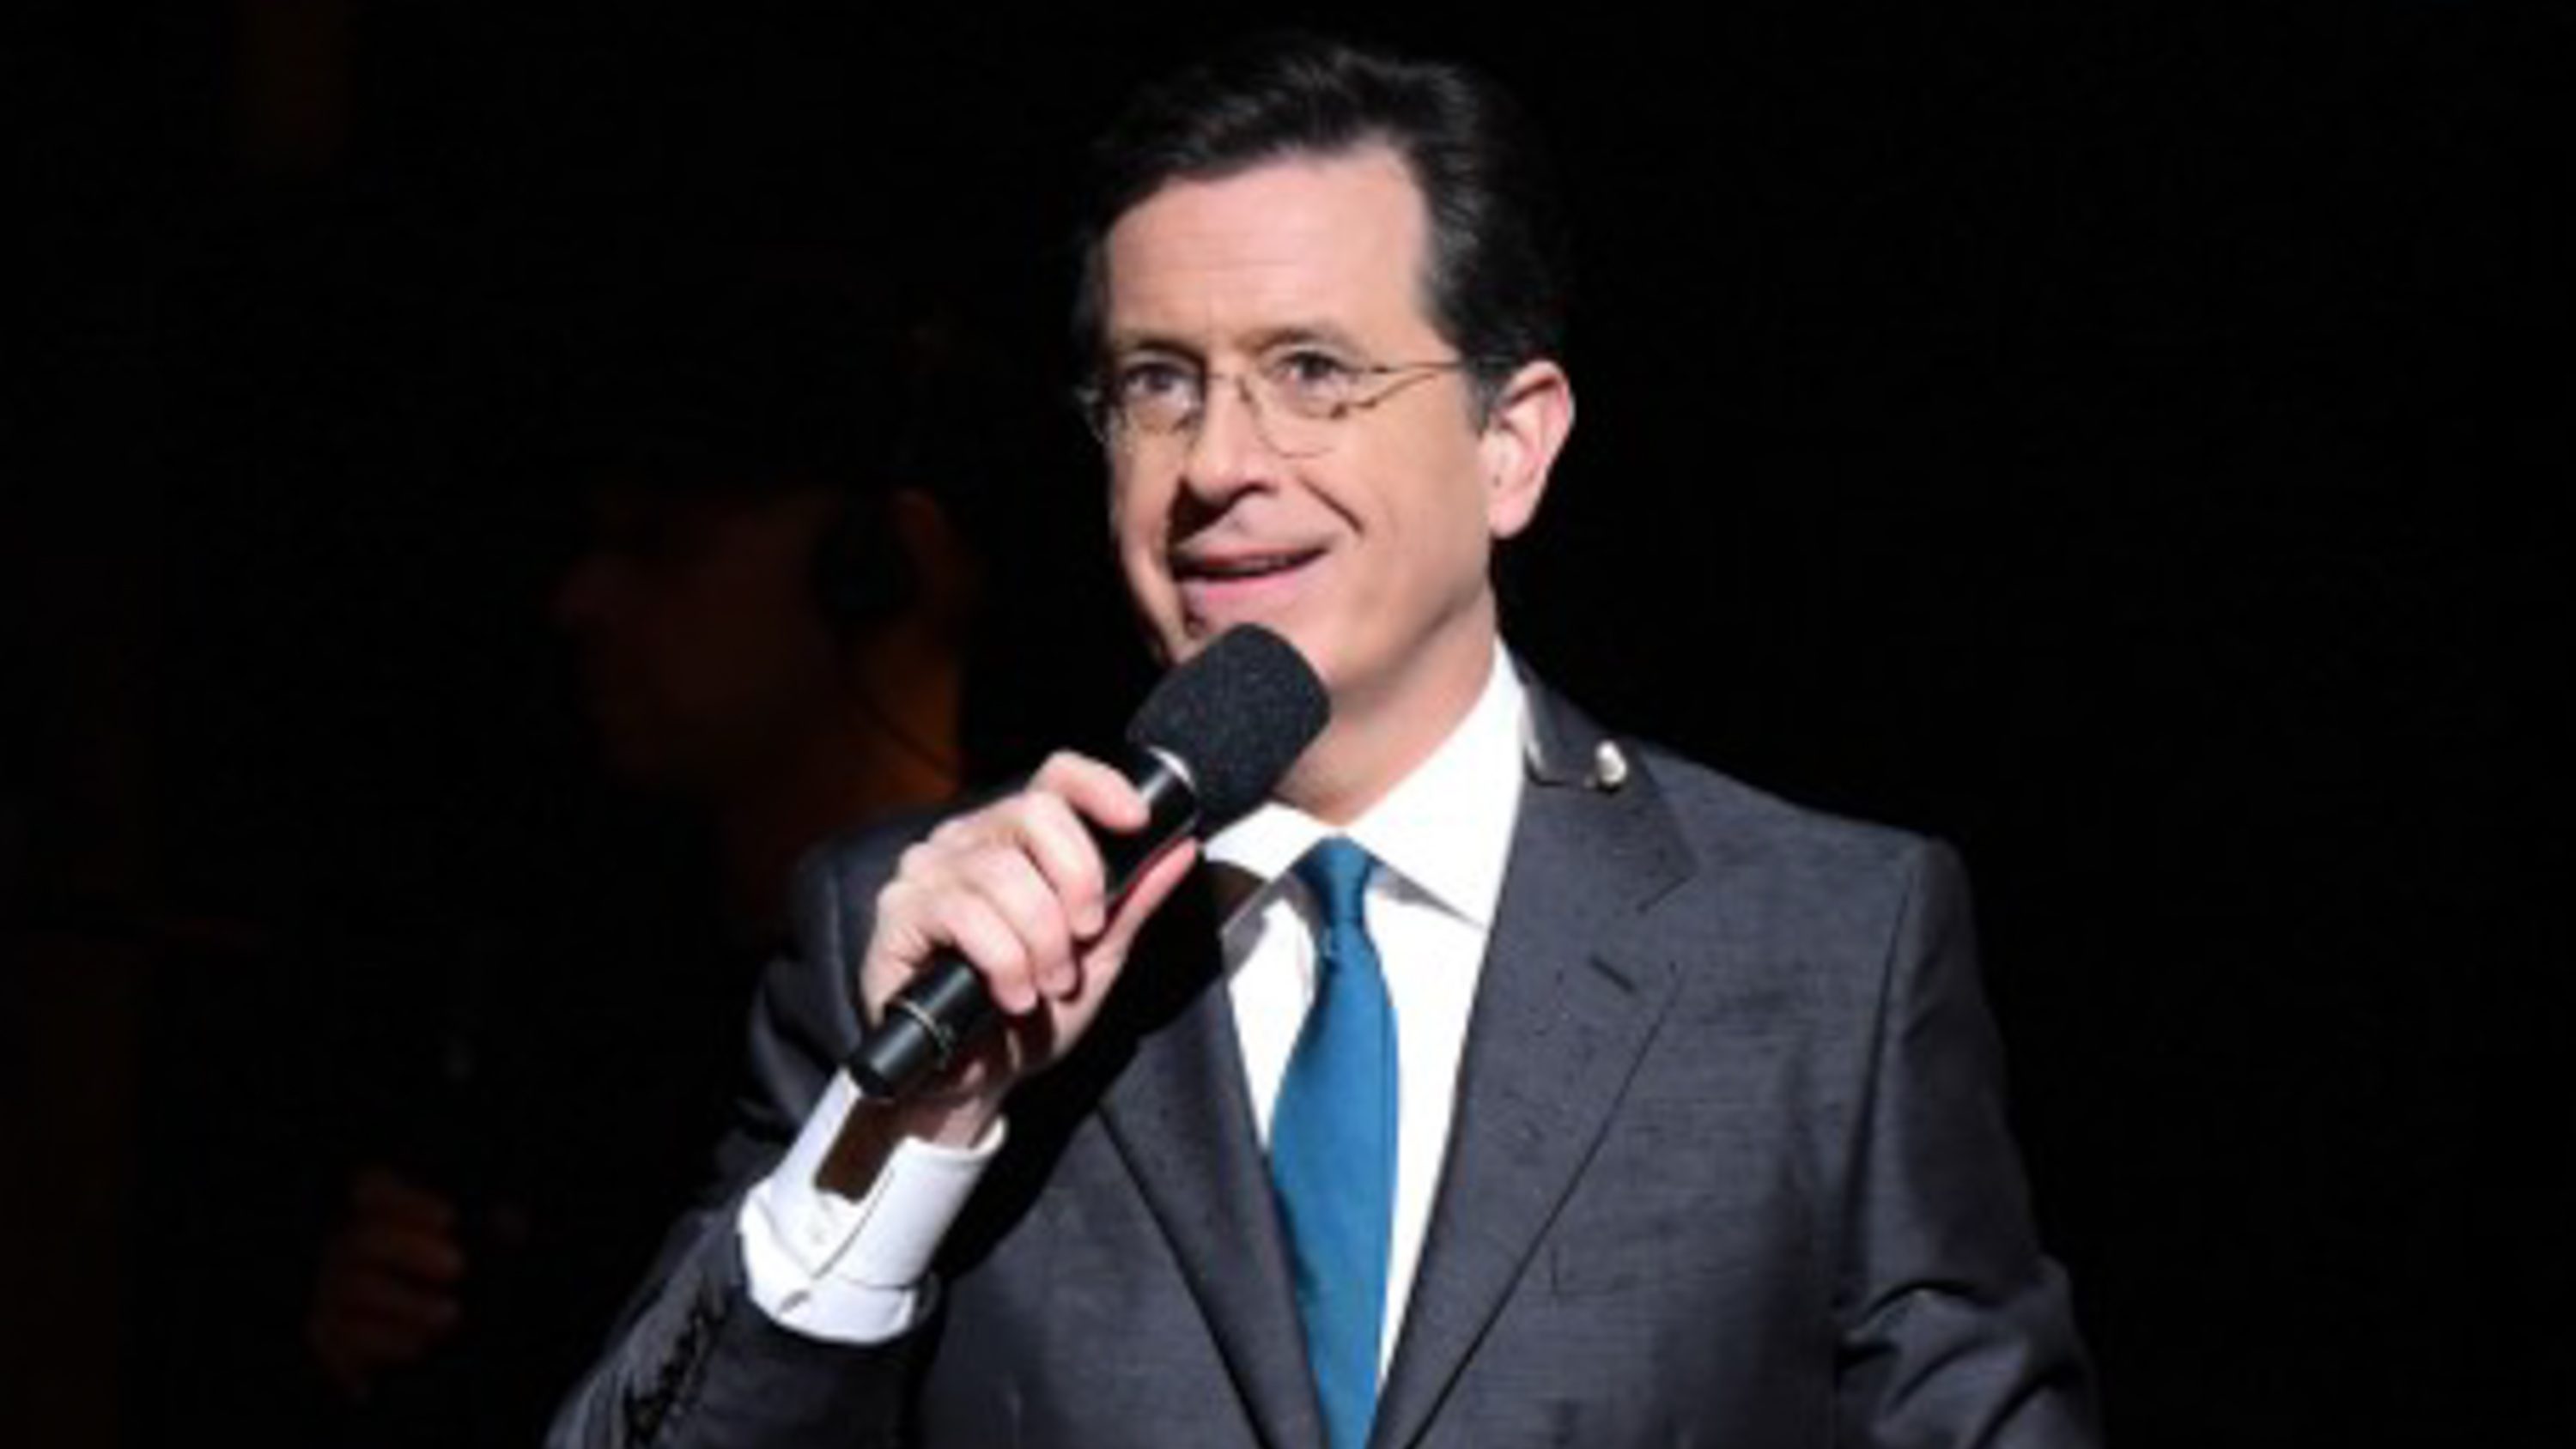 STEPHEN COLBERT. The comedian is set to host the 2017 Emmys. File photo by Theo Wargo/AFP Photo 